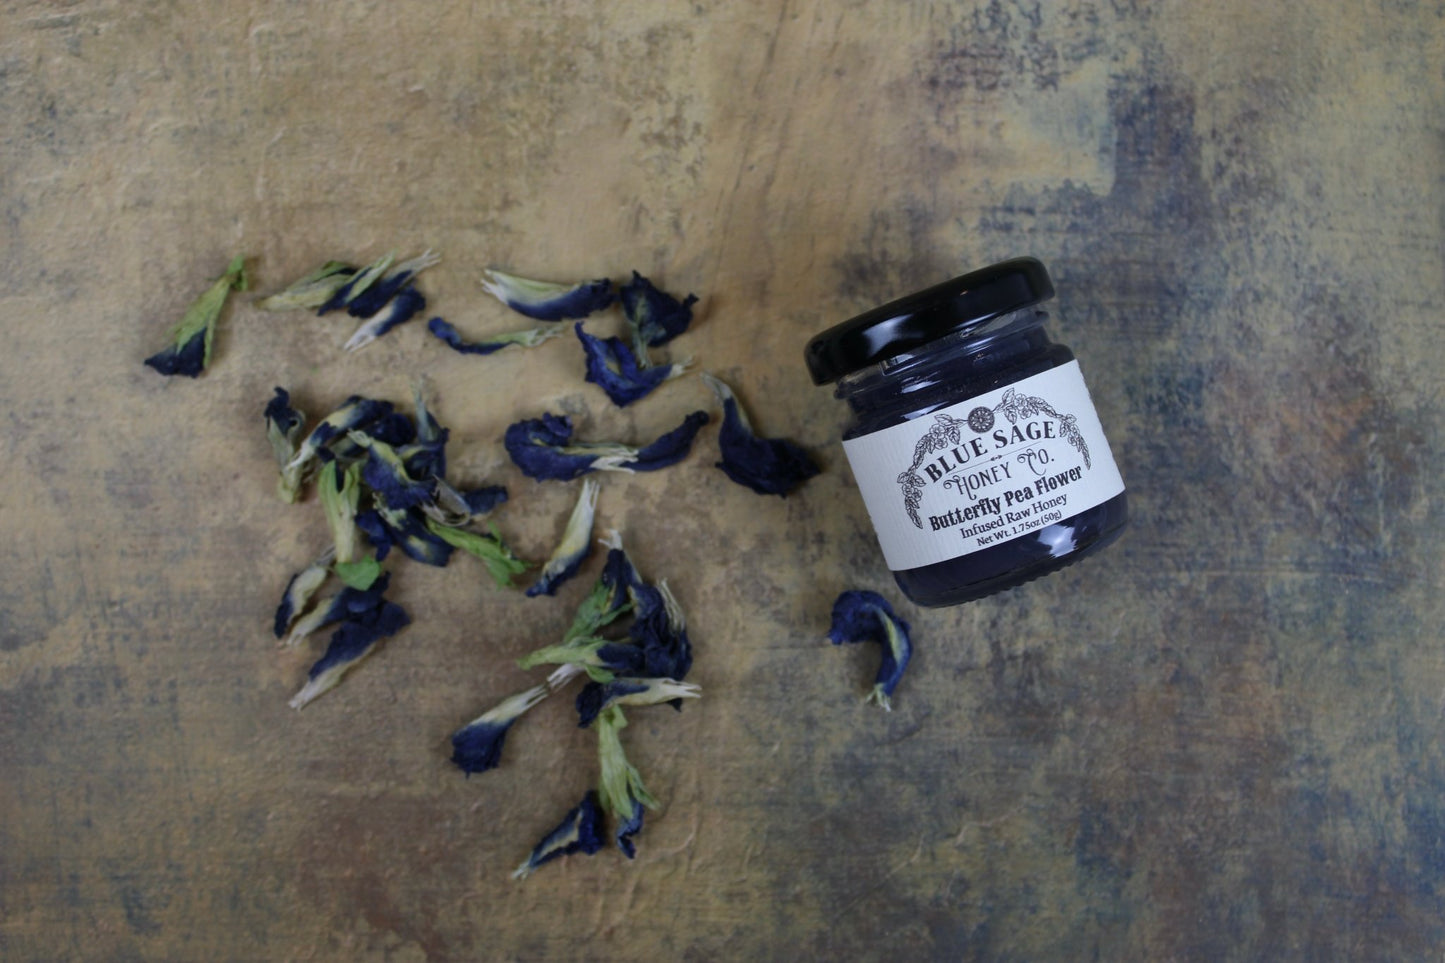 Butterfly Pea Flower Infused Raw Honey - Blue Butterfly Pea Flower Honey - Blue Sage Family Farm